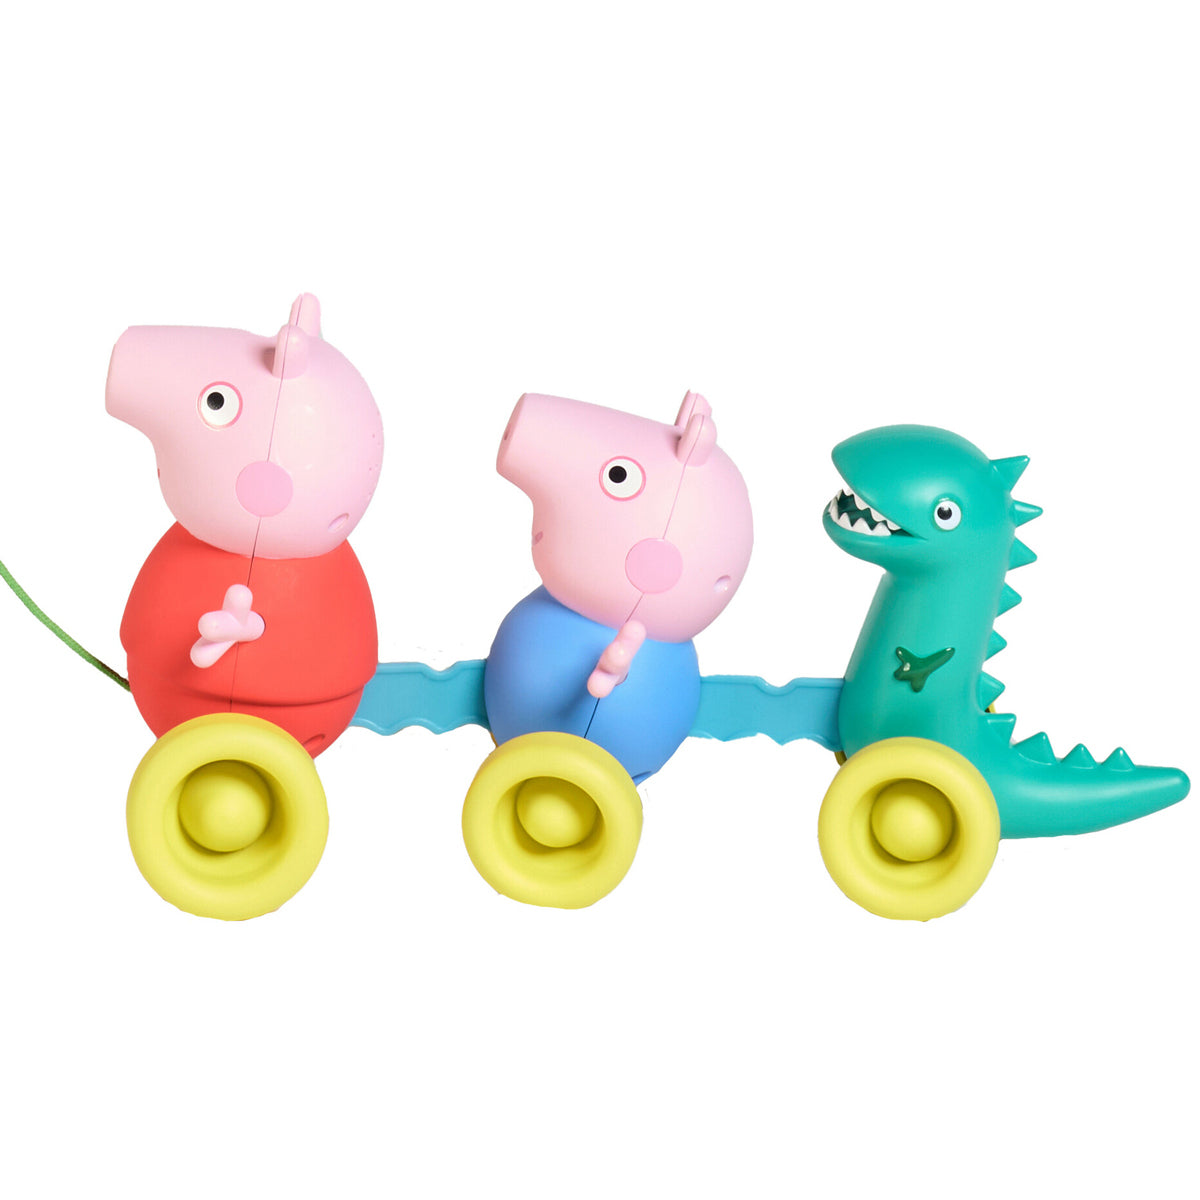 Peppa Pig Pull Along toy